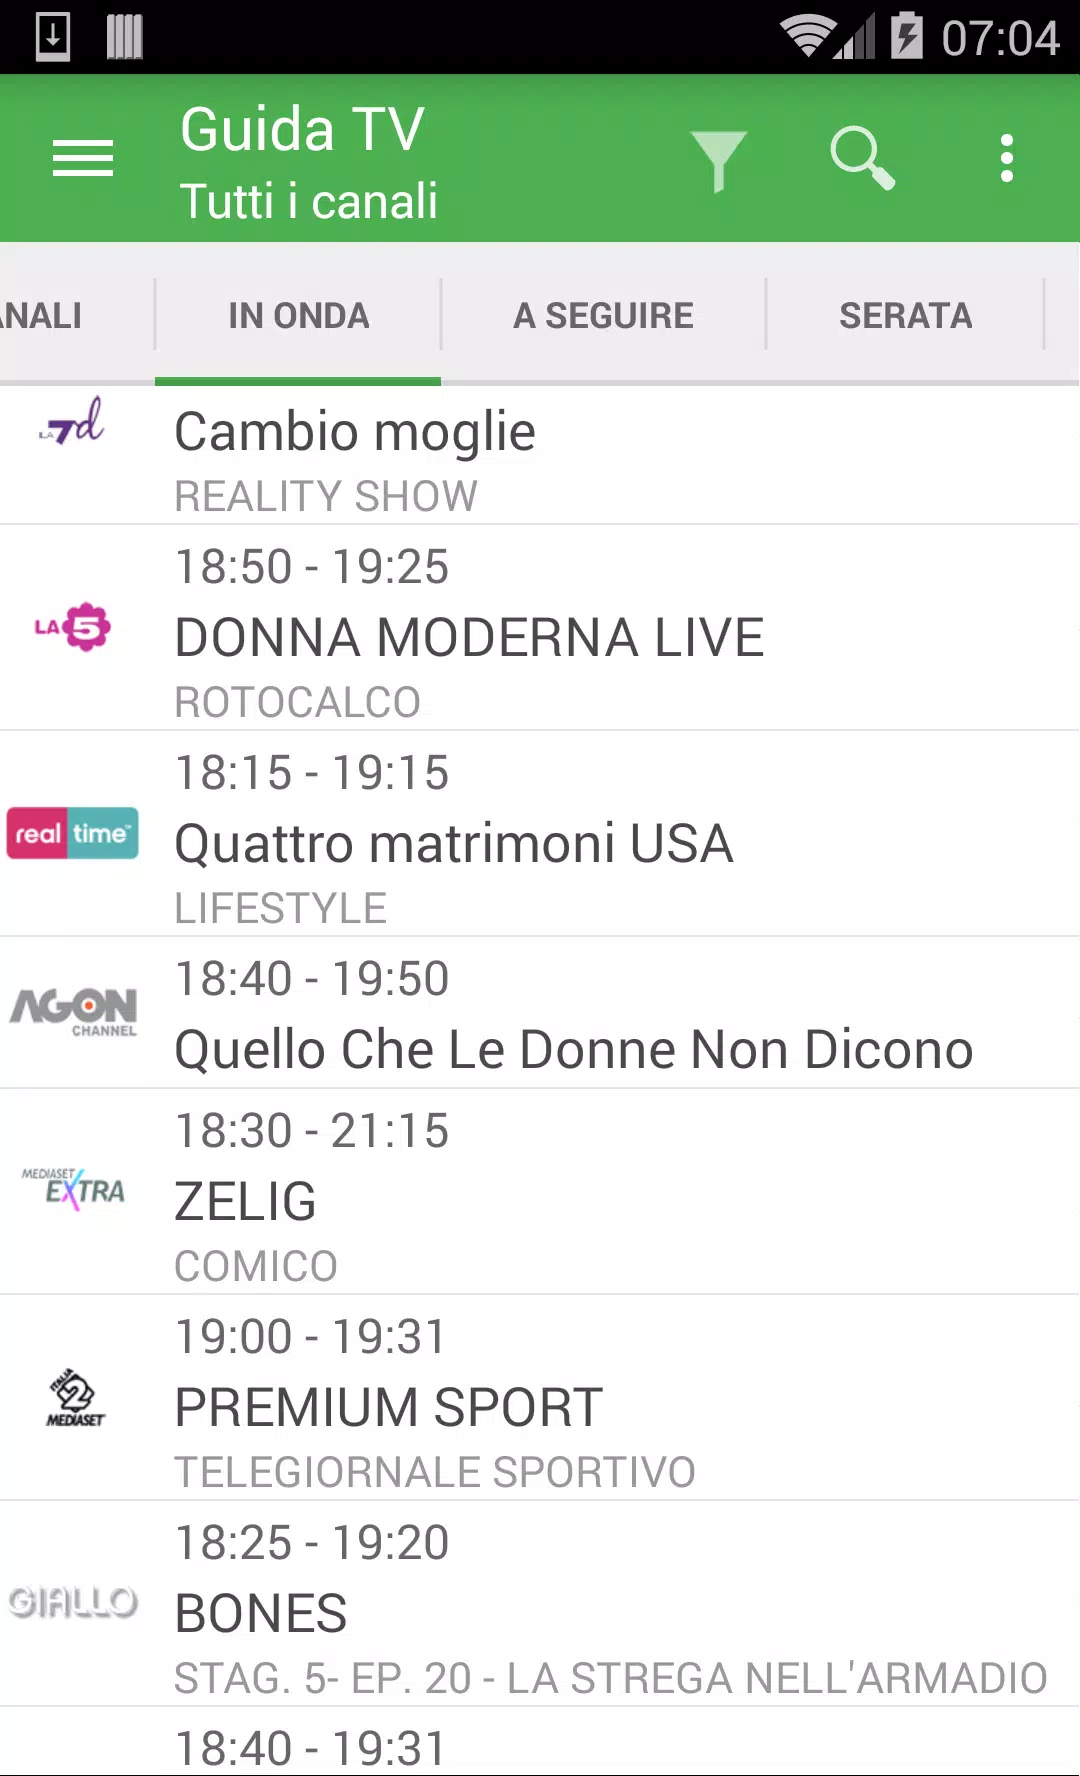 TV Guide Italy for Android - APK Download